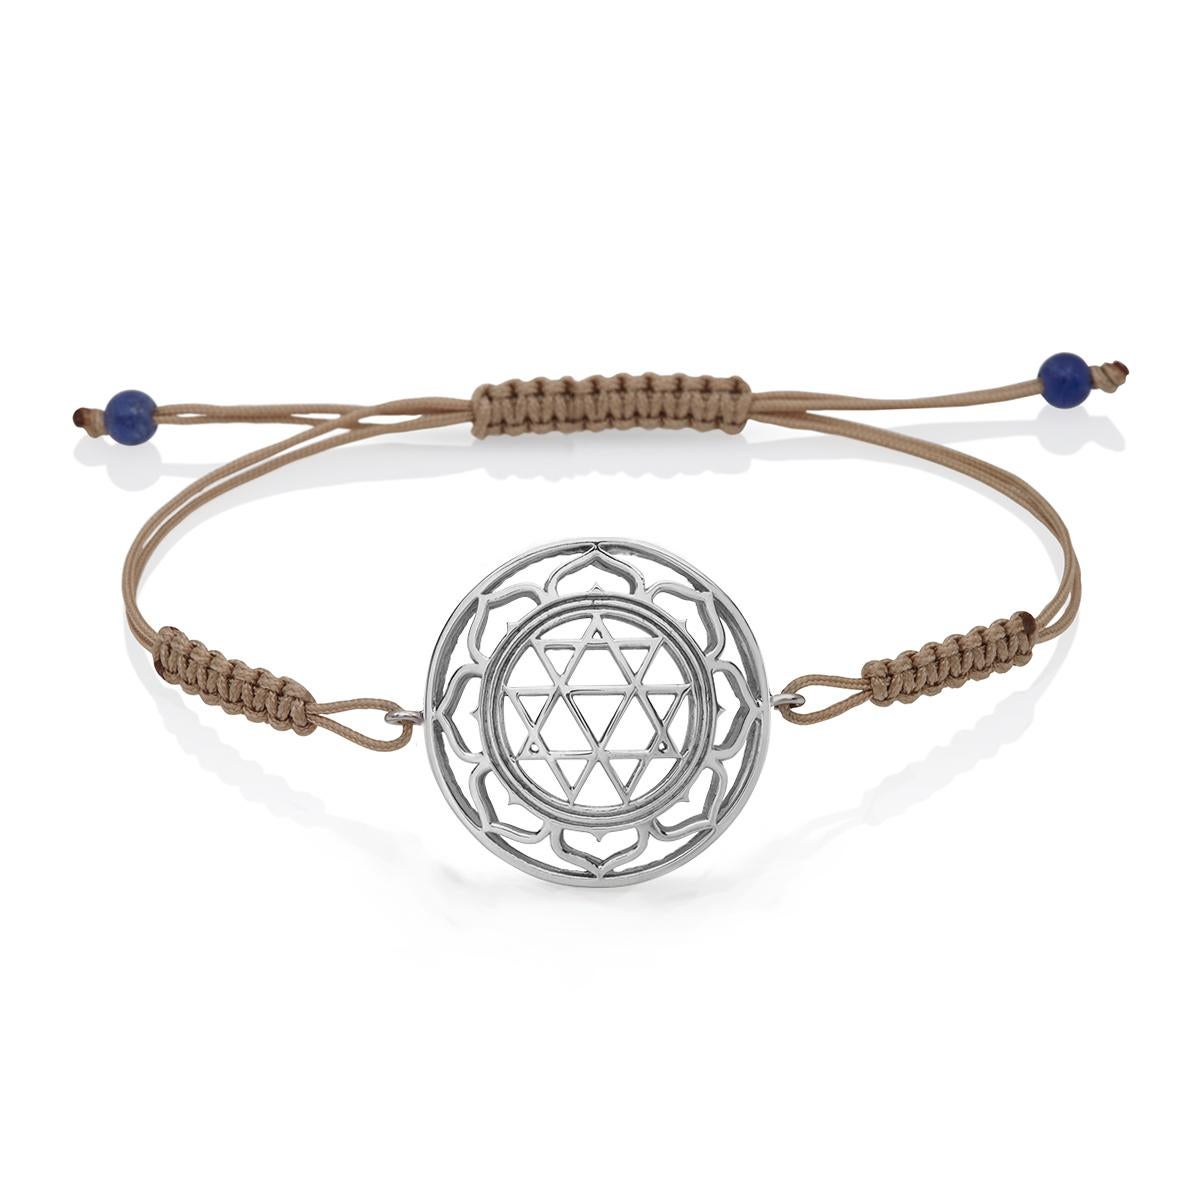 Durga Macrame Bracelet in 14Kt white Gold with Brown Cord  and Lapis Lazuli Beads.
A very beautiful and wearable macrame bracelet made of 14Kt Gold. It will match with everything in your closet. Designed by Nicofilimon – a jewelry brand renowned for